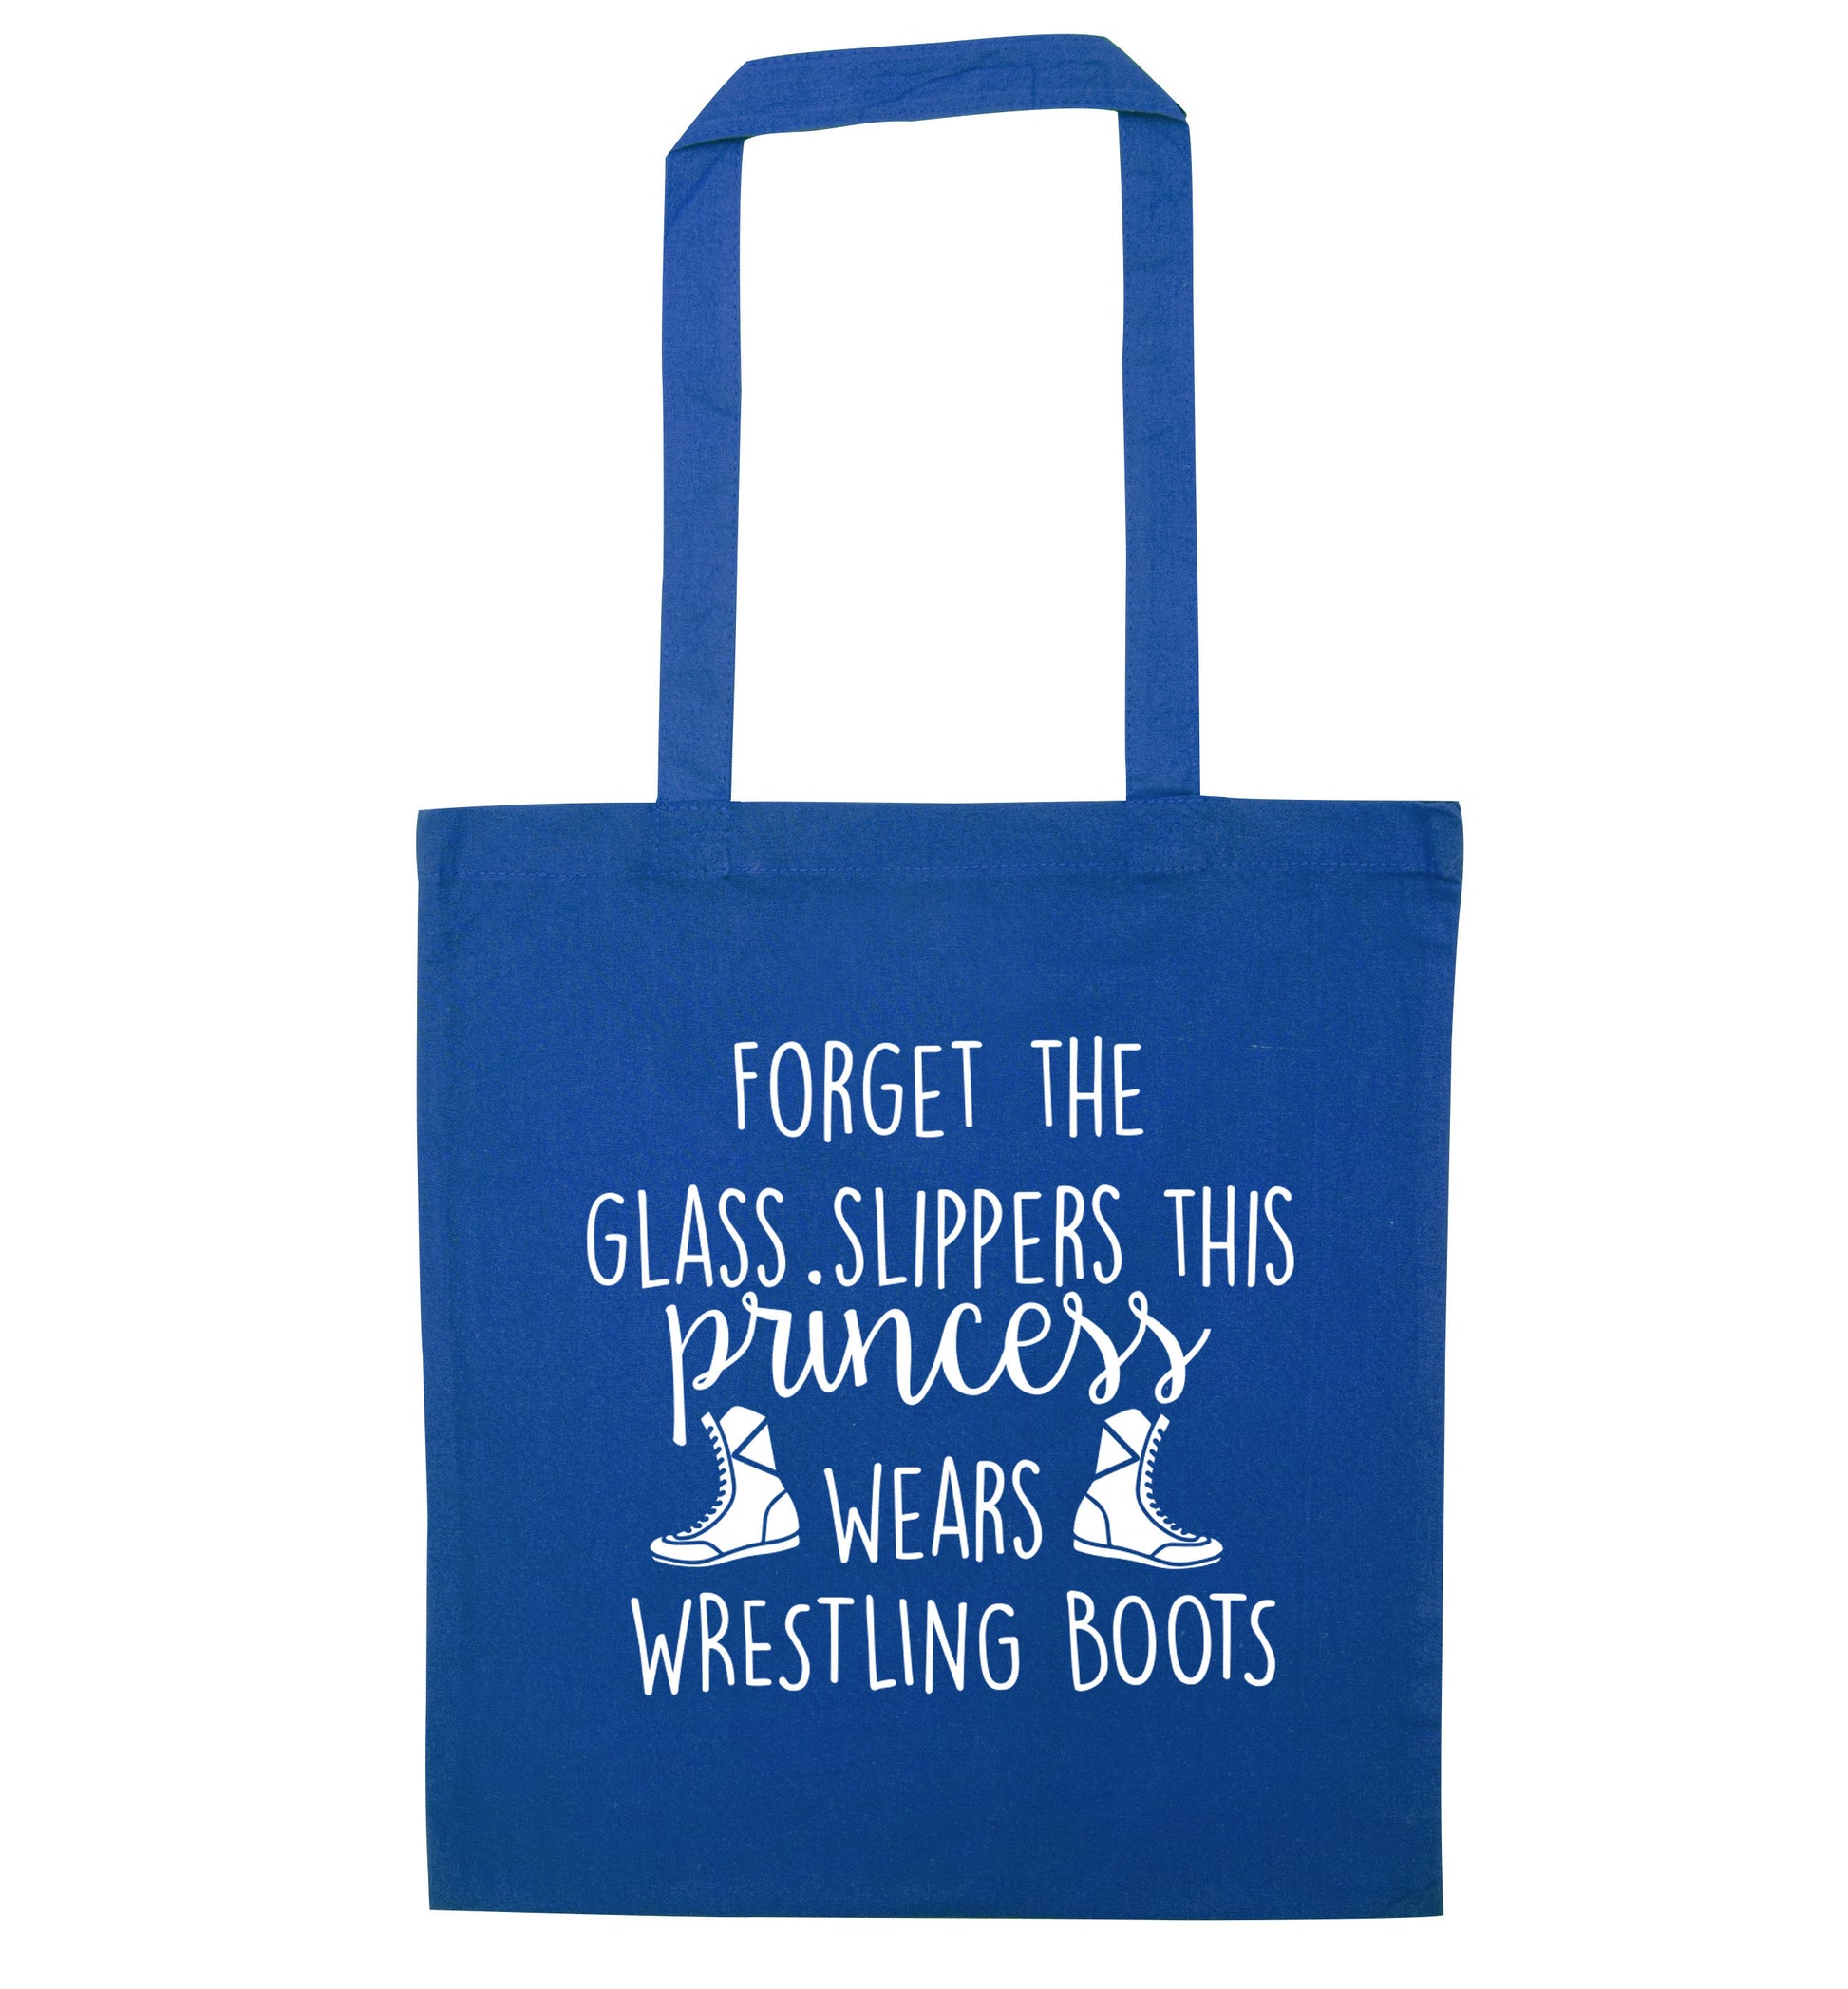 Forget the glass slippers this princess wears wrestling boots blue tote bag